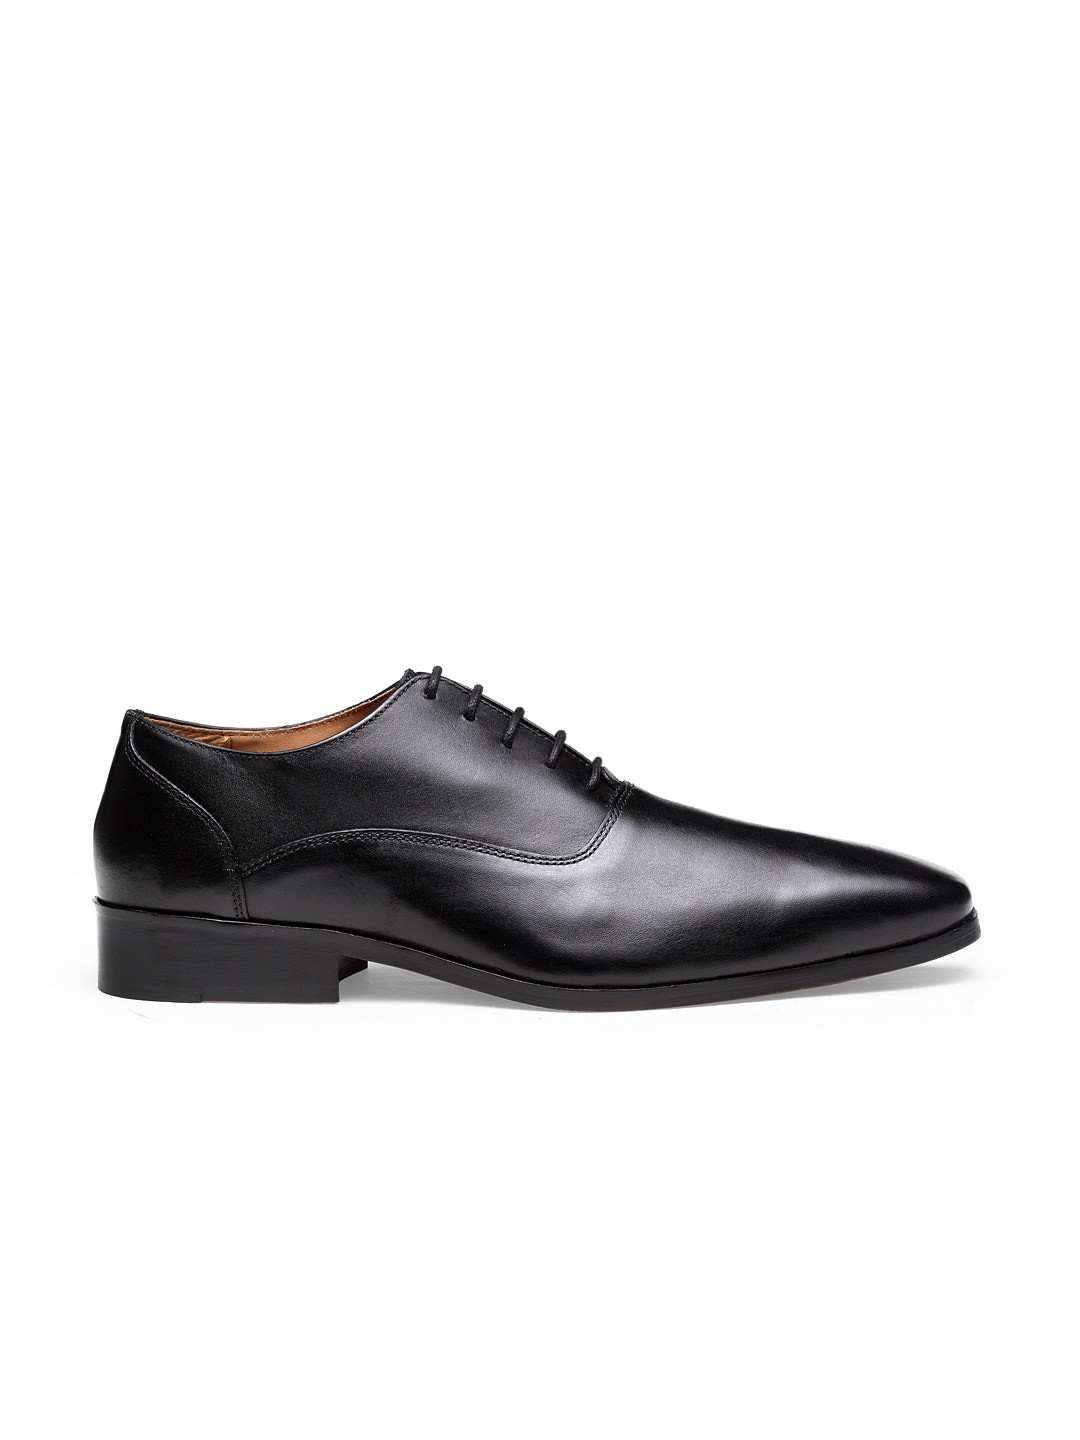 BLACK LEATHER OXFORD SHOES | HATS OFF ACCESSORIES OXFORD SHOES